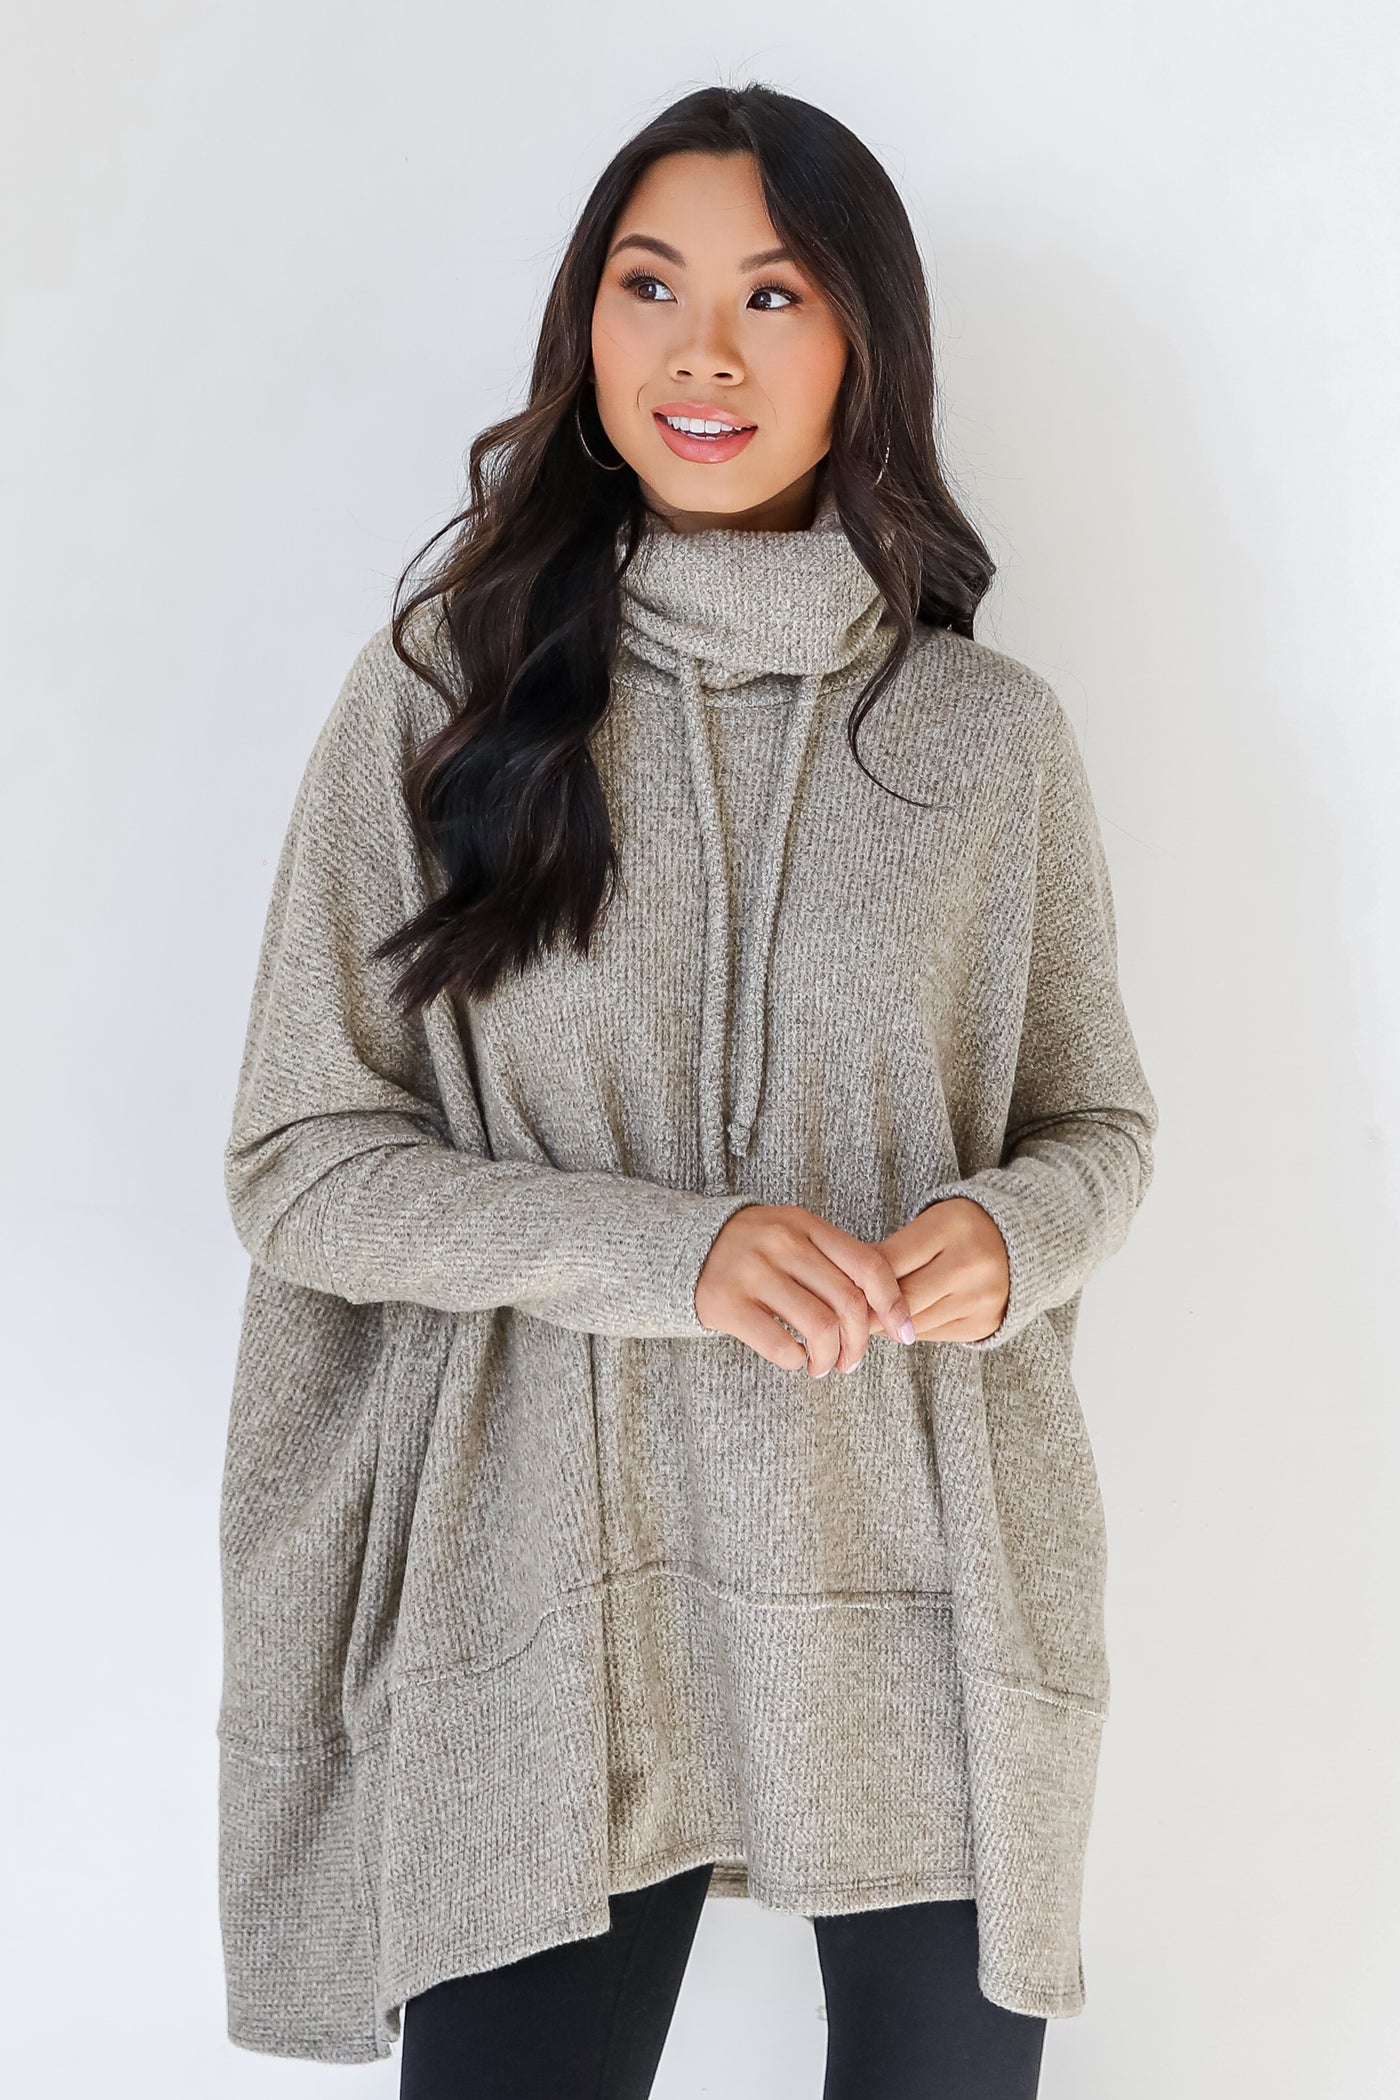 Oversized Cowl Neck Sweater in olive front view